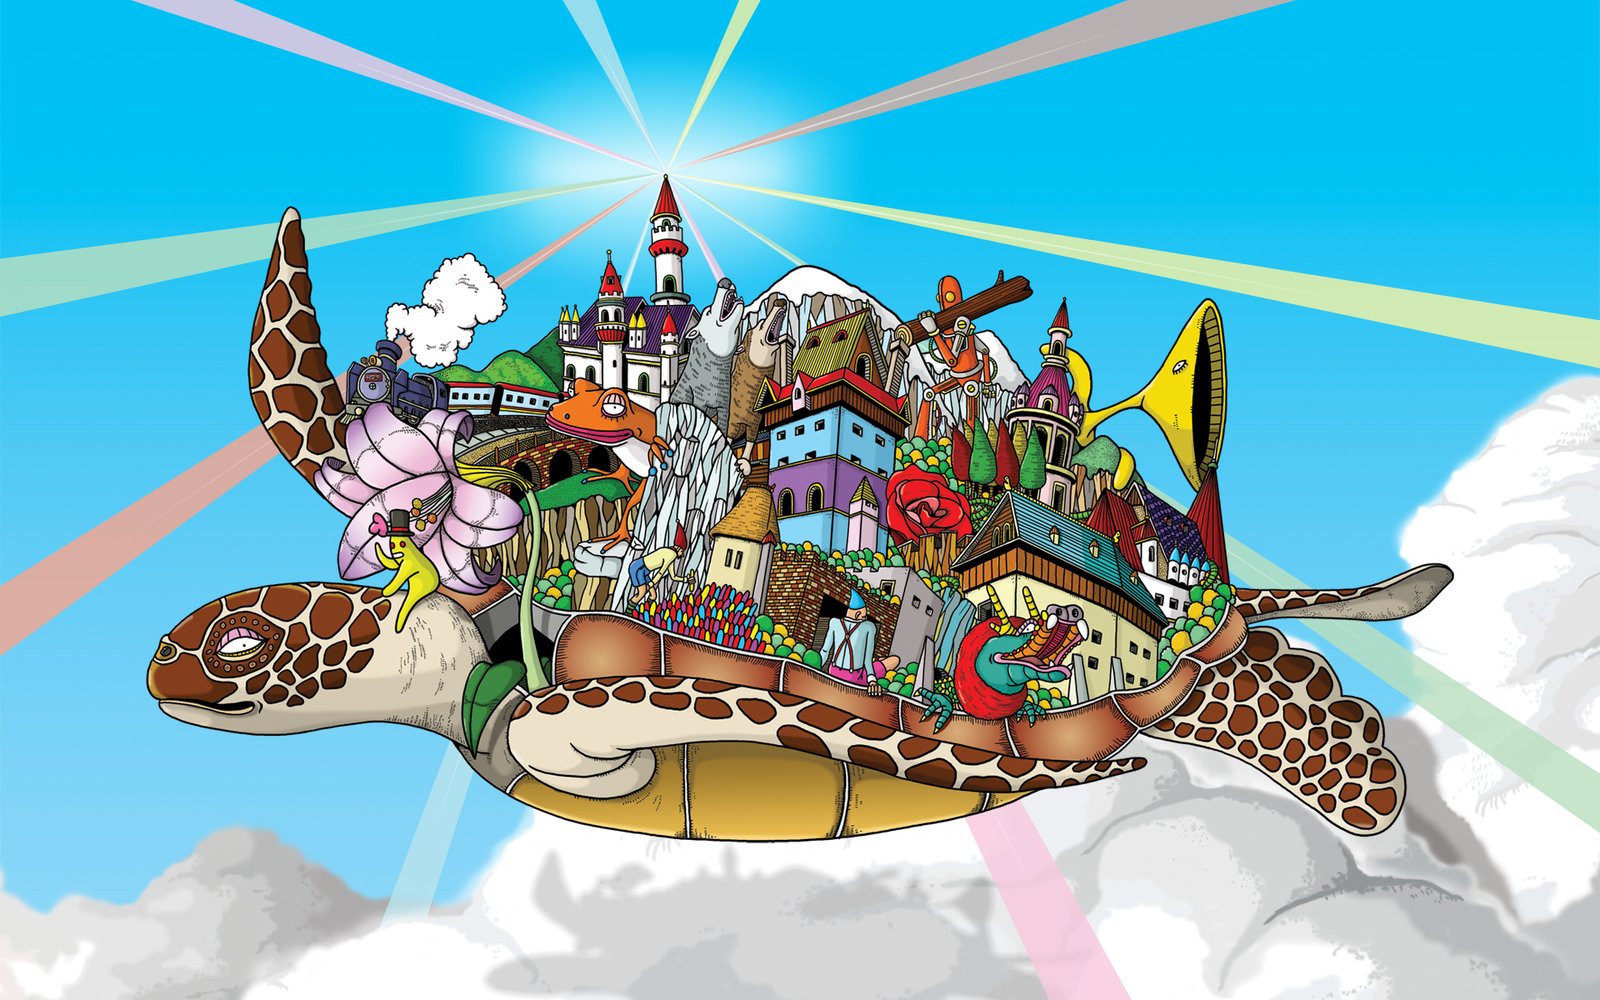  bavarian Dr. Seuss town, with animals, robots, and dragons, 